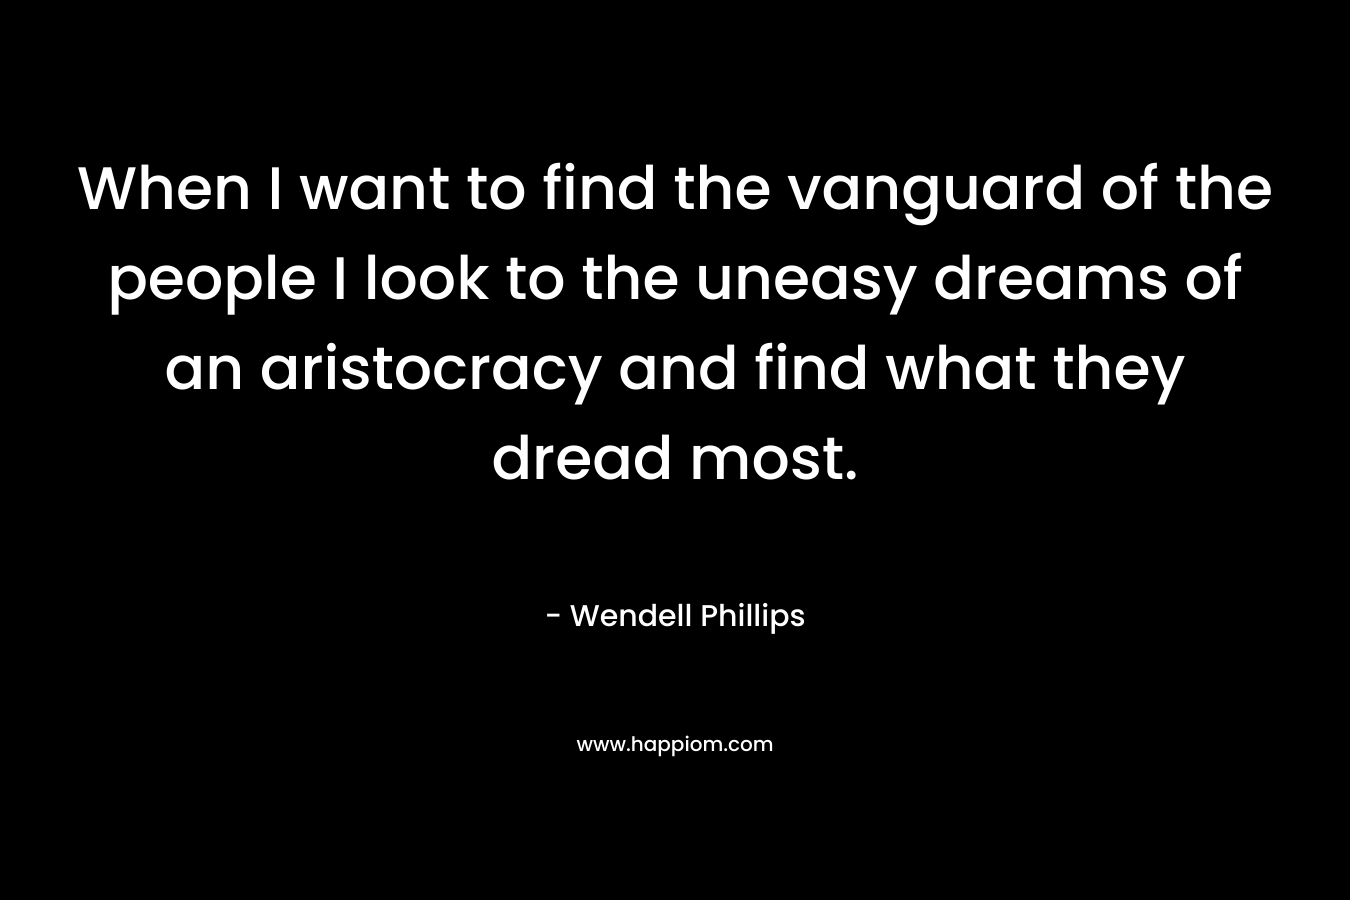 When I want to find the vanguard of the people I look to the uneasy dreams of an aristocracy and find what they dread most. – Wendell Phillips